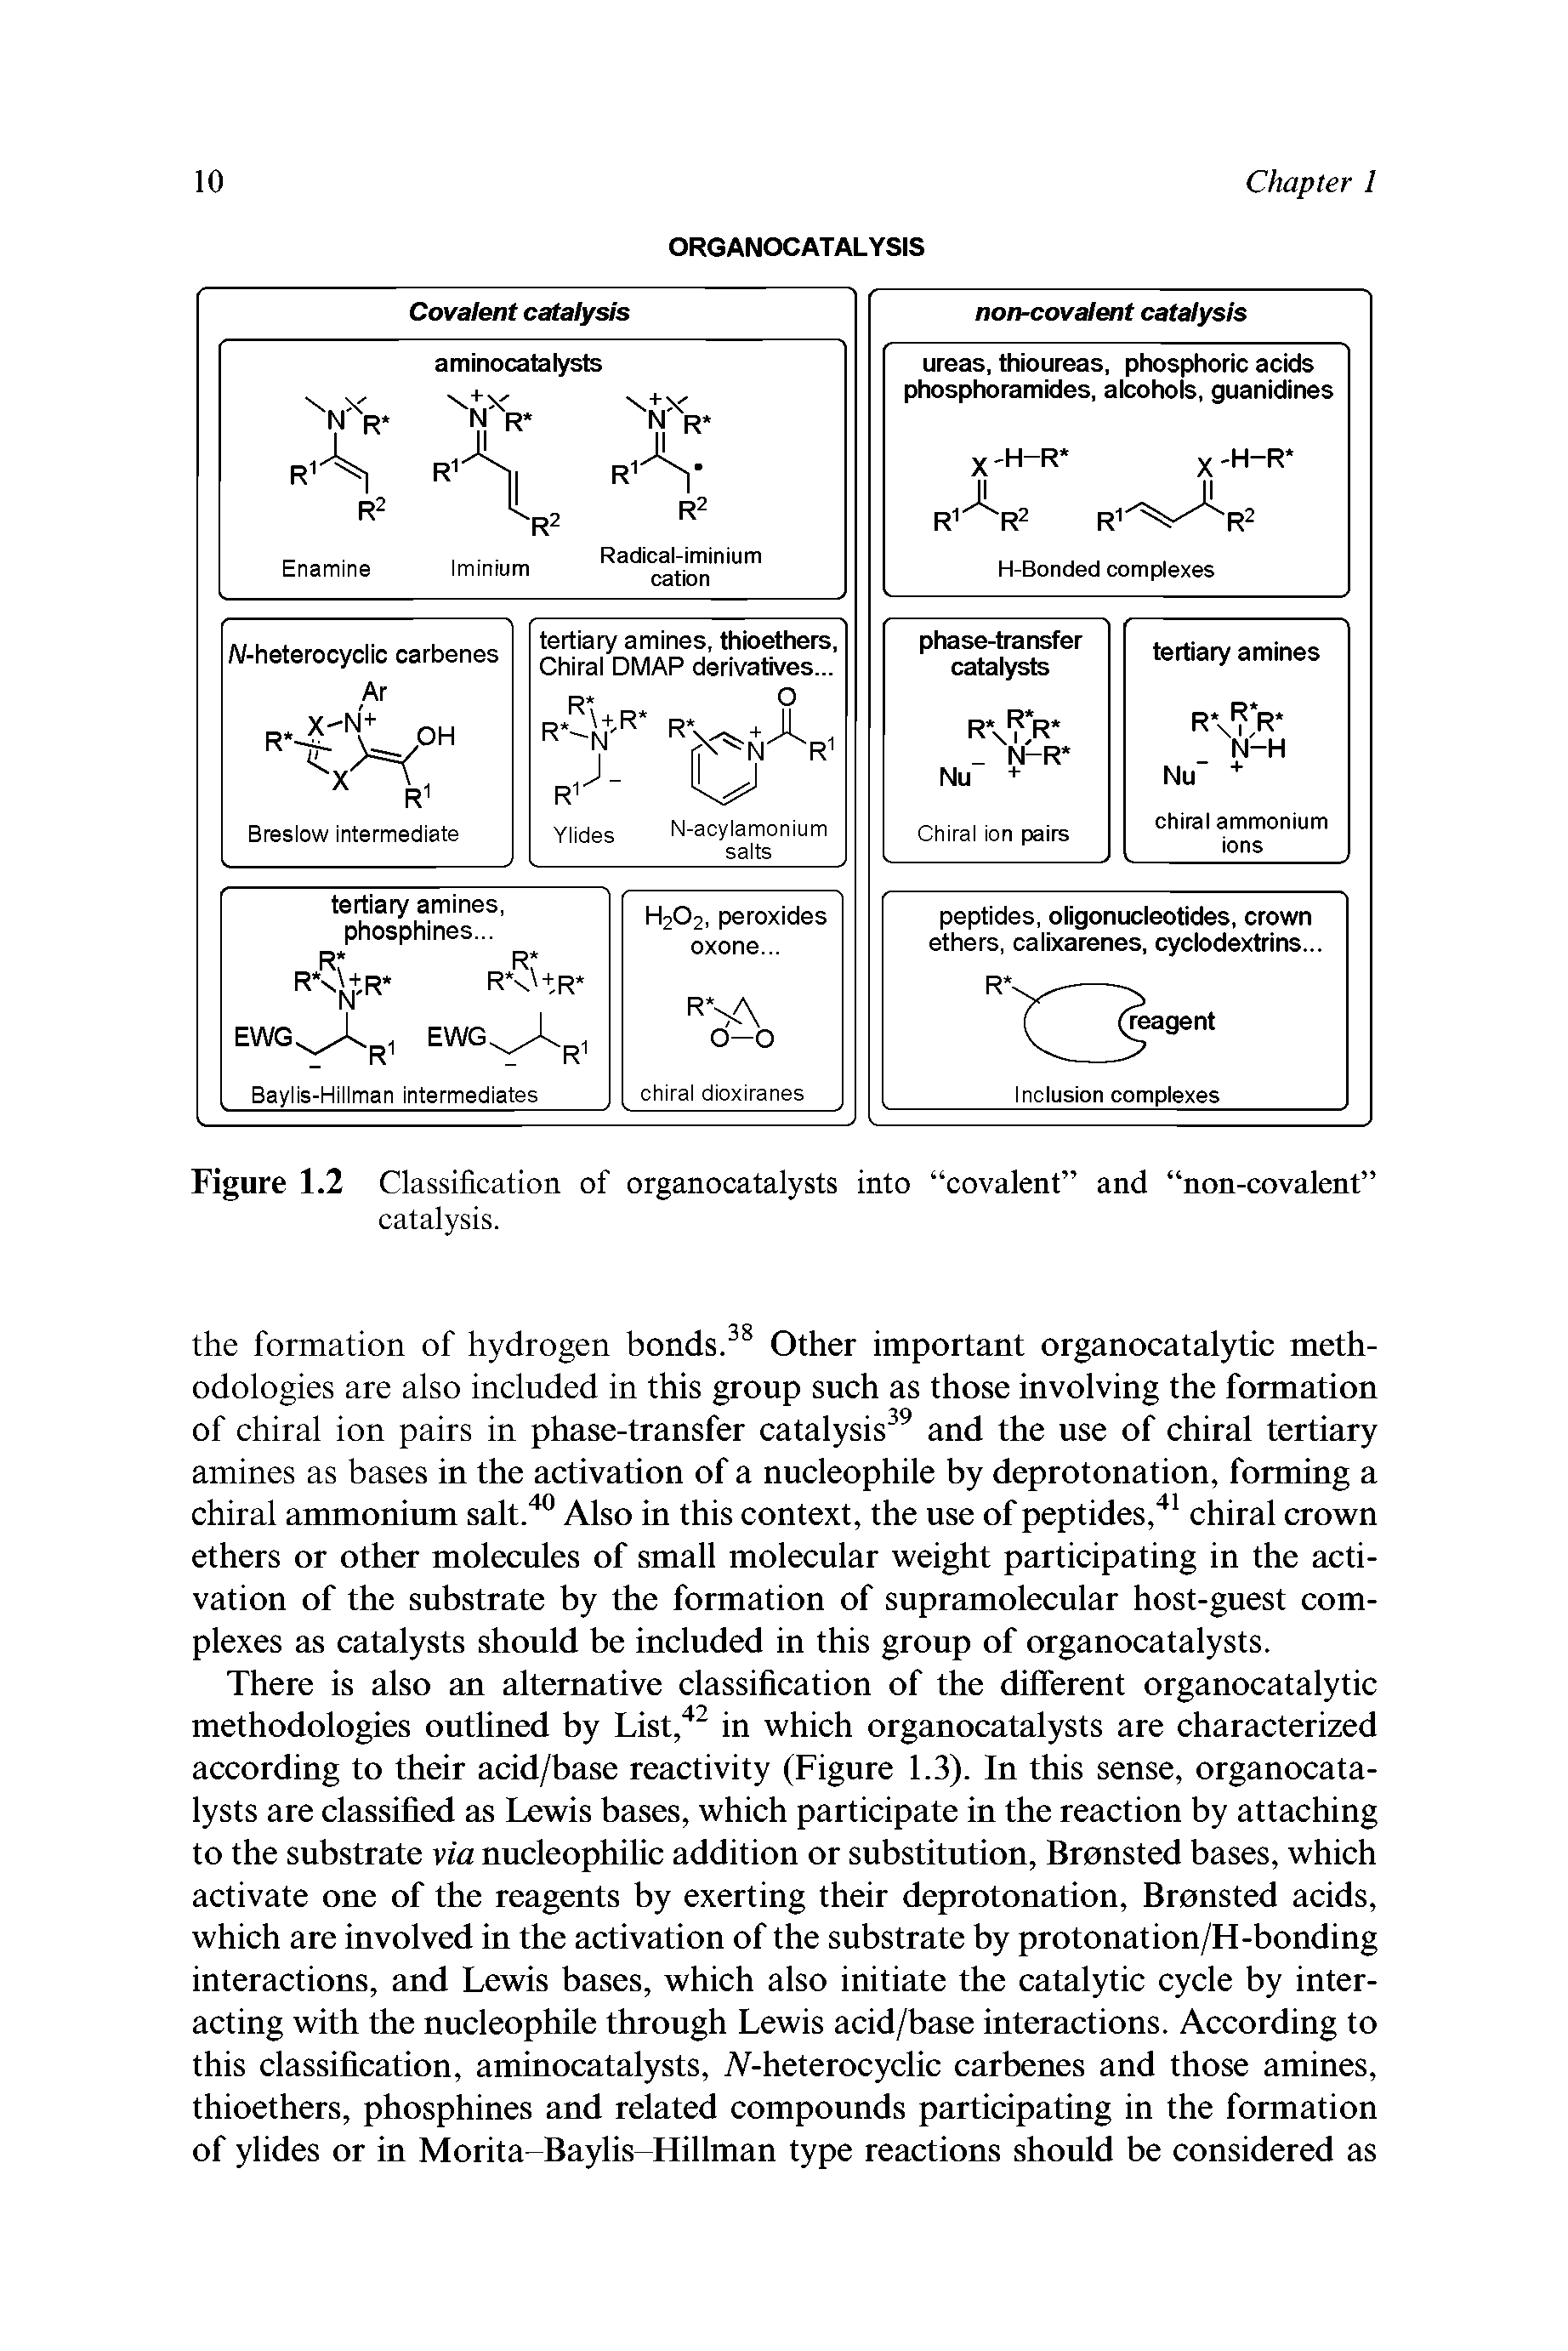 Figure 1.2 Classification of organocatalysts into covalent and non-covalent catalysis.